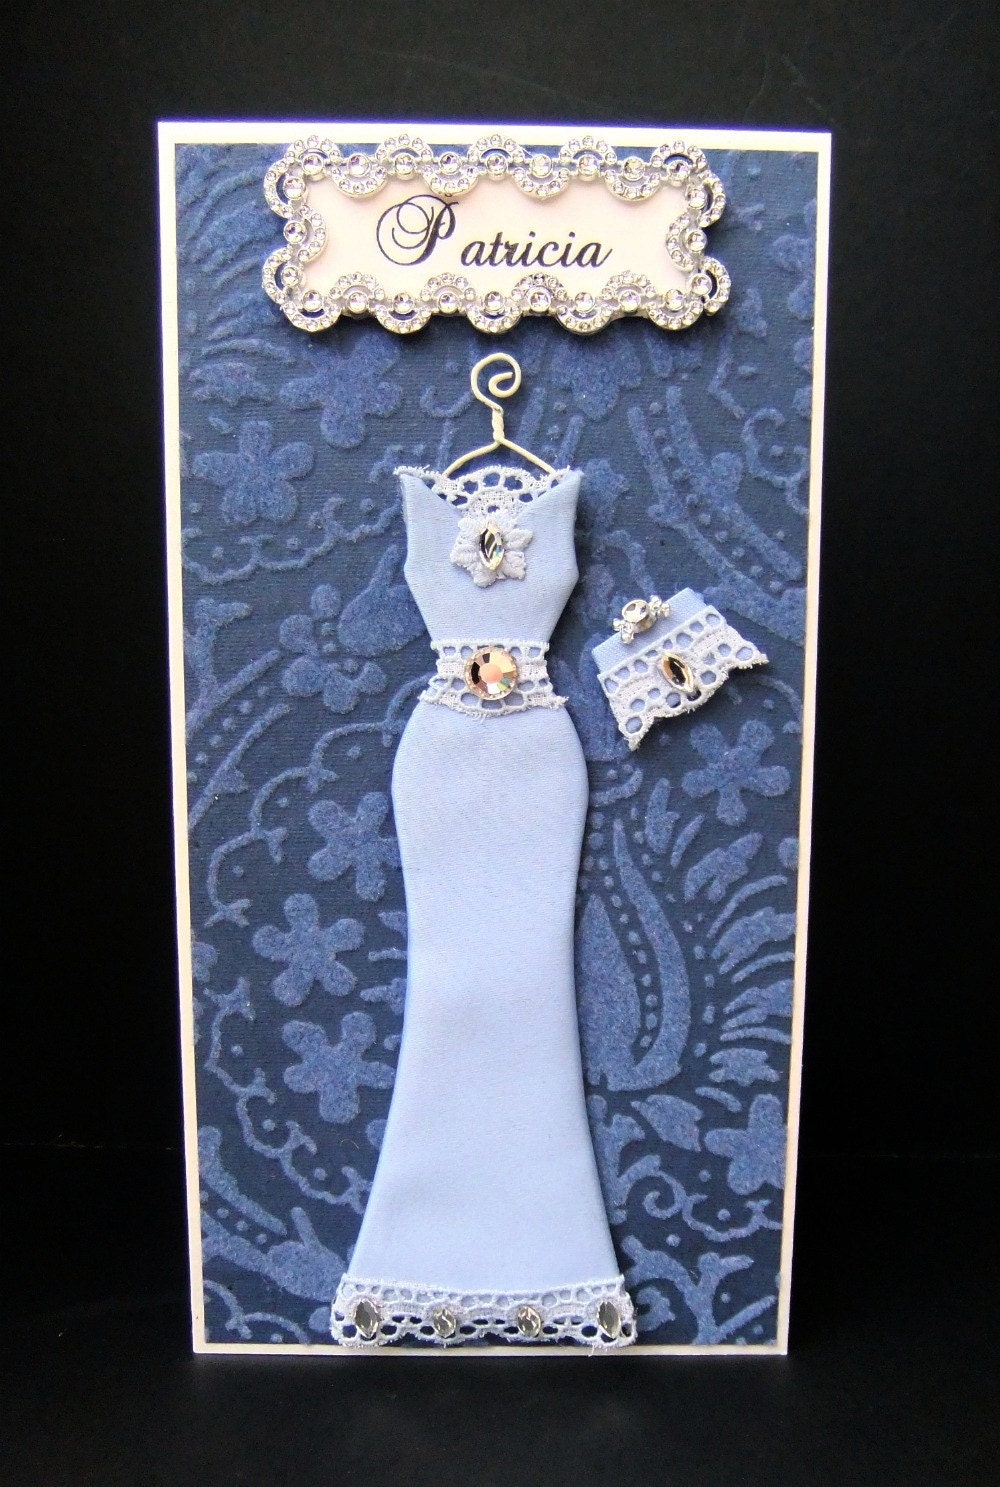 Patricia Personalized Dress Card / DL Size / Handmade Greeting